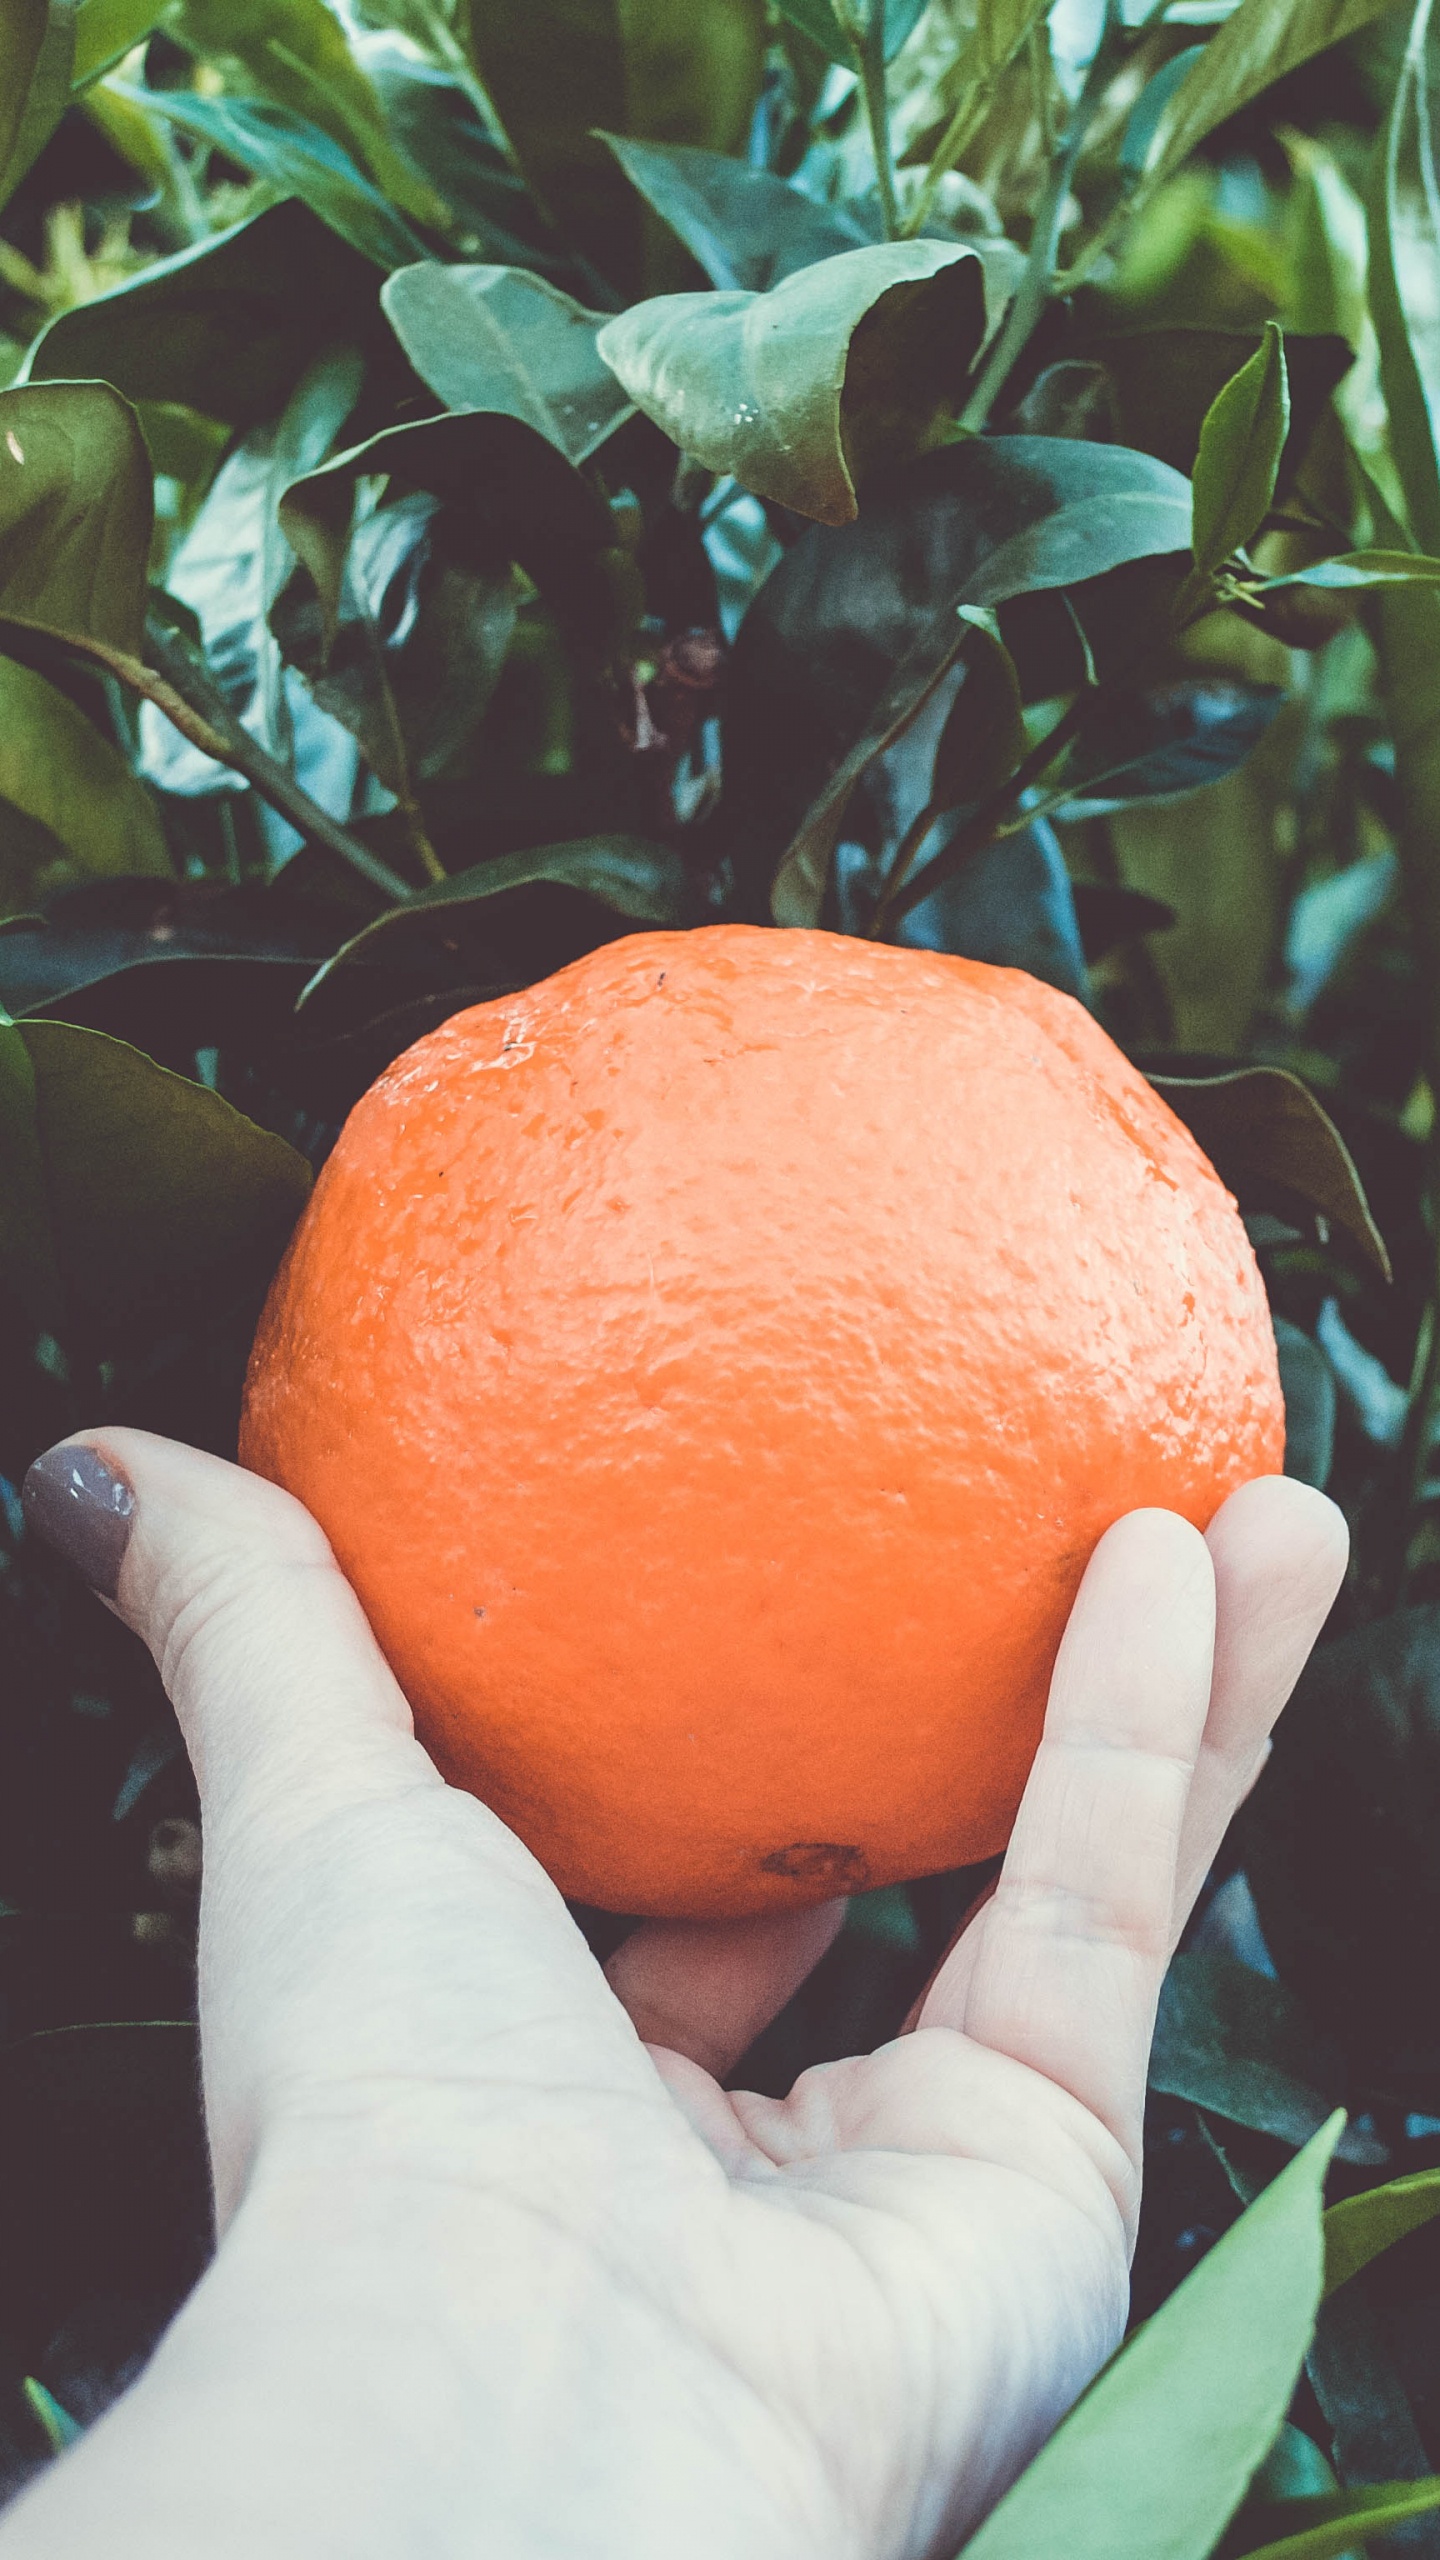 Person Holding Orange Fruit During Daytime. Wallpaper in 1440x2560 Resolution